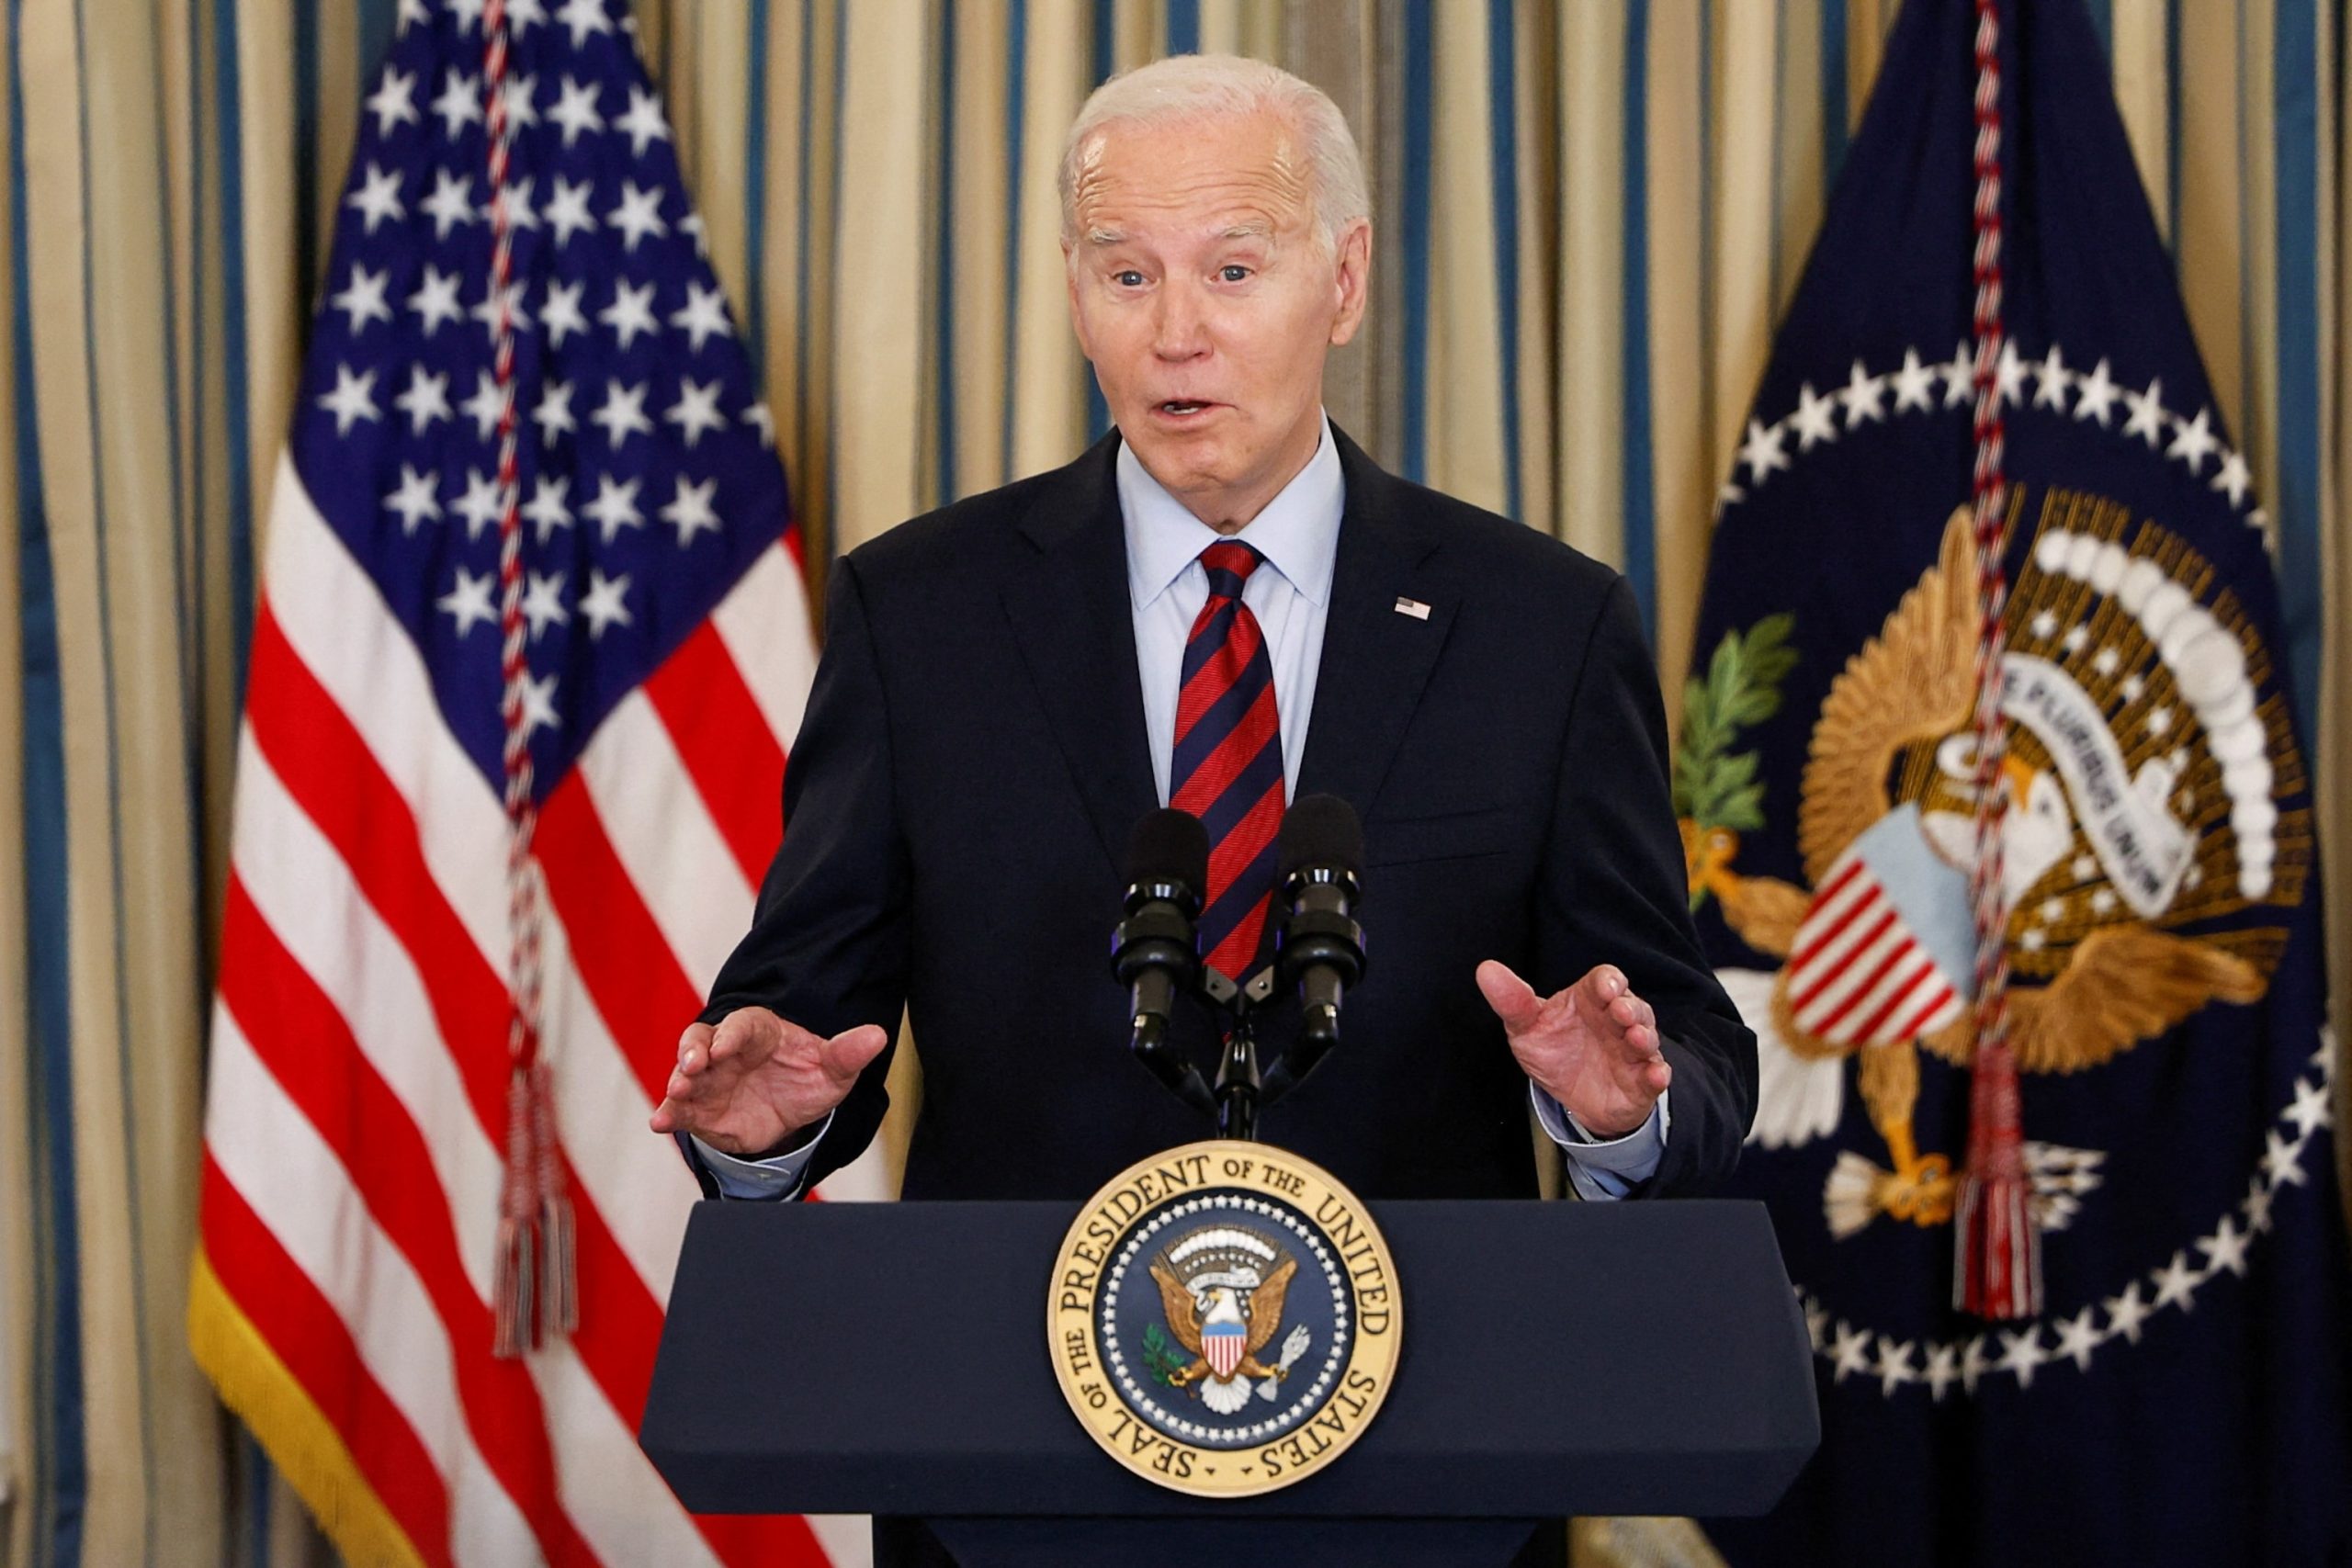 Biden to Focus on Economic Recovery and Tax Proposals for Corporations in State of the Union Address